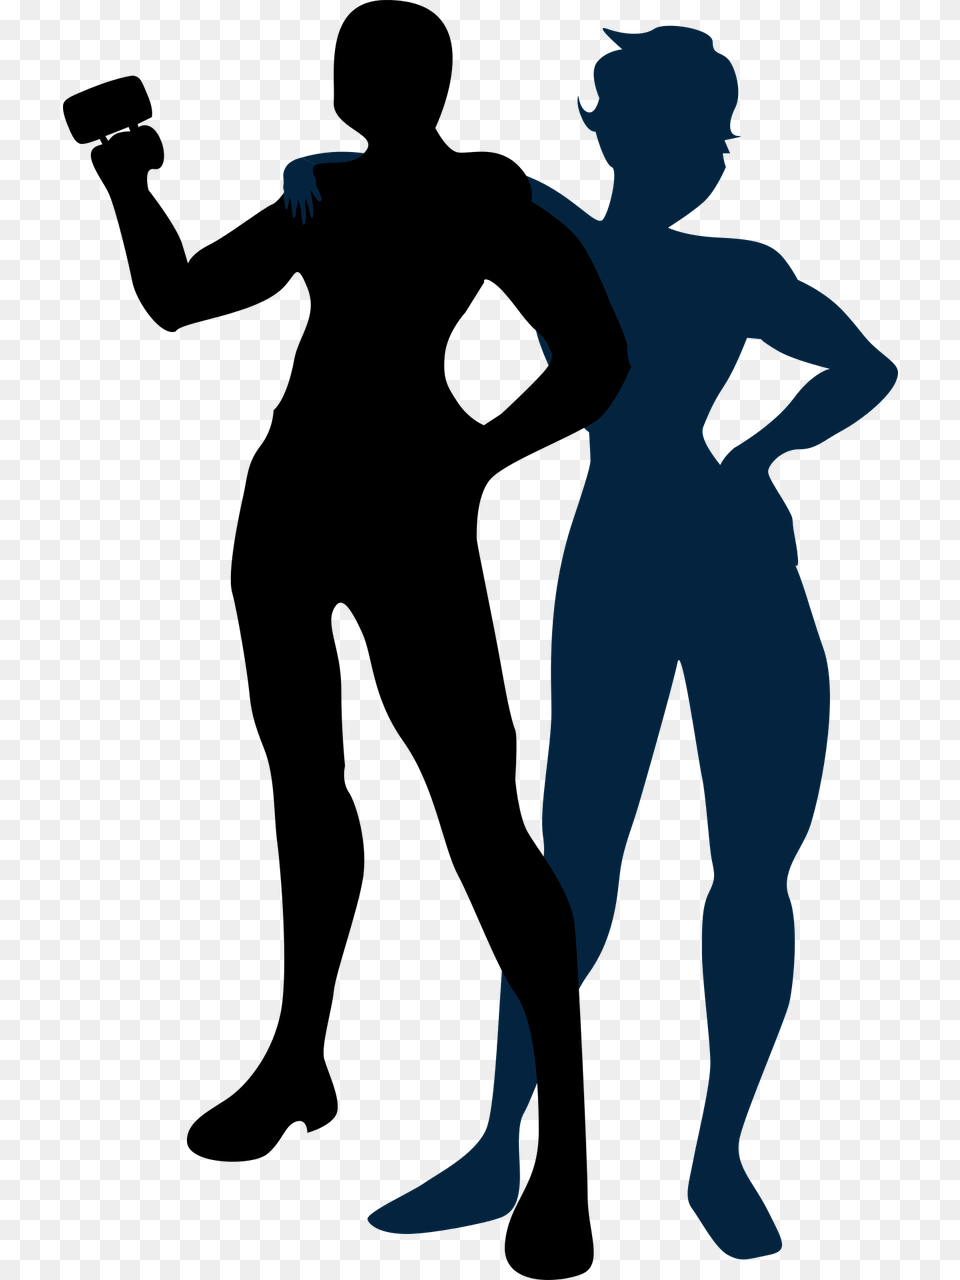 Man With Cup Silhouette Man And Woman Silhouette Couple, Adult, Dancing, Leisure Activities, Male Png Image